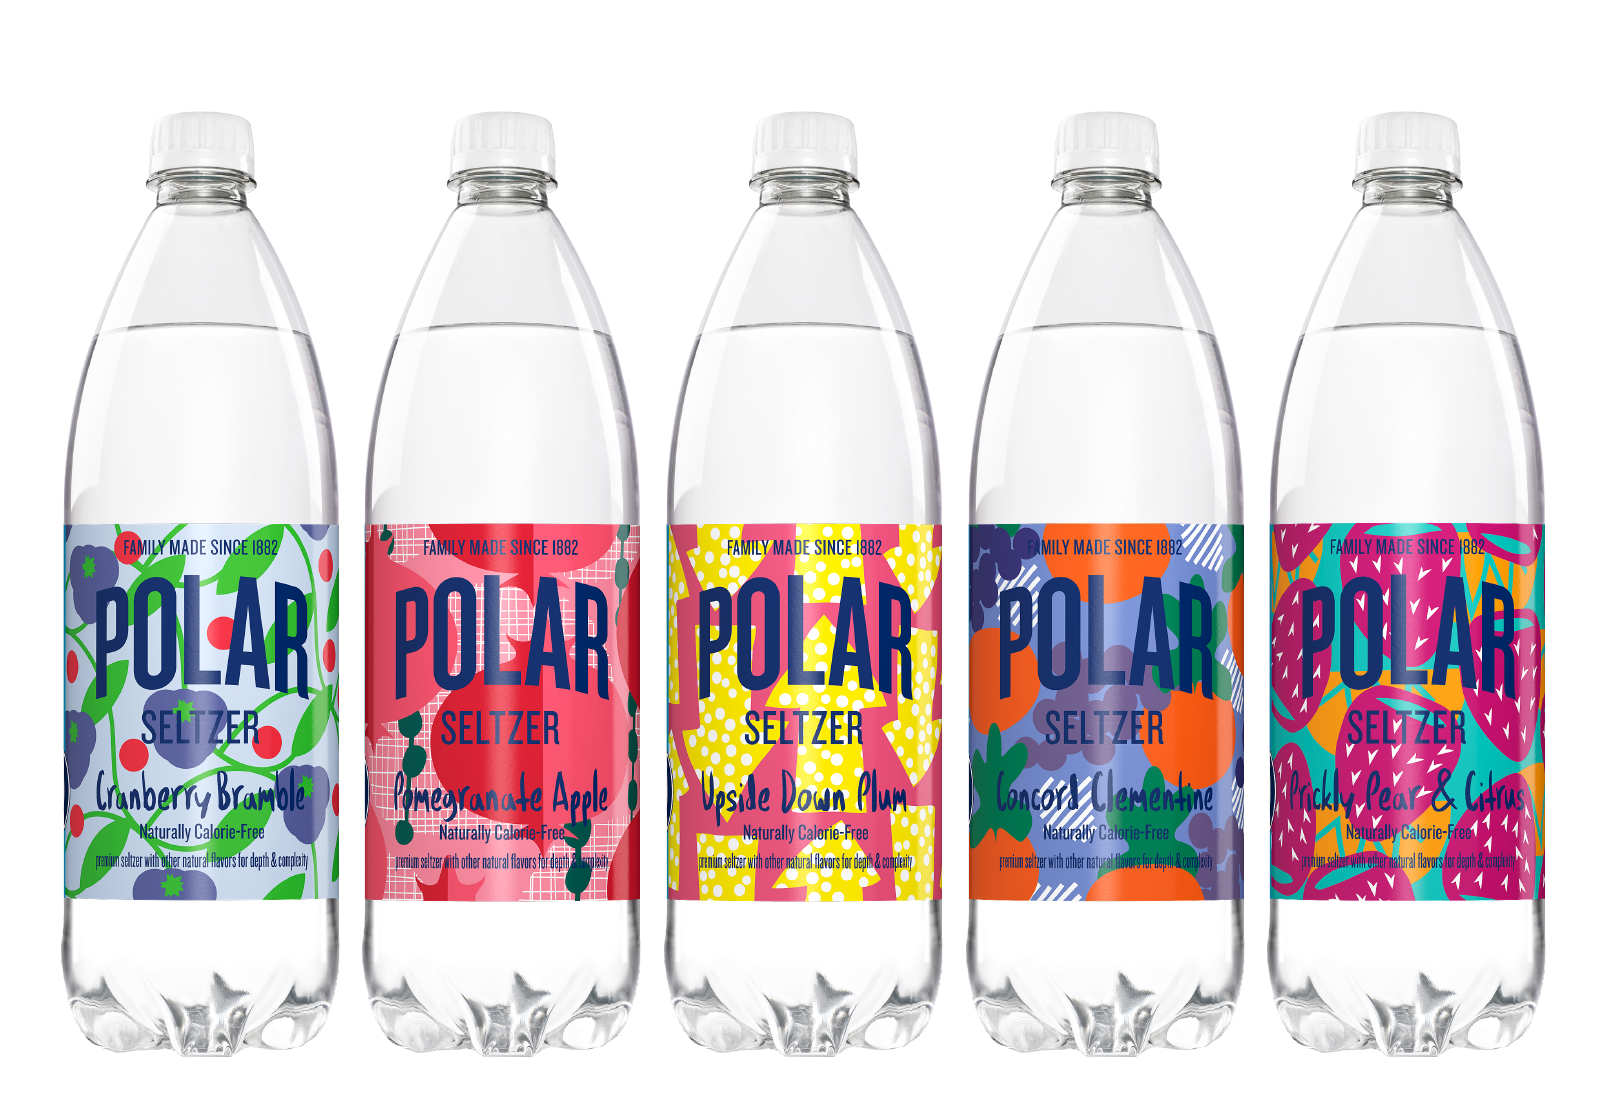 Polar Seltzer’s 2021 winter flavors are now available